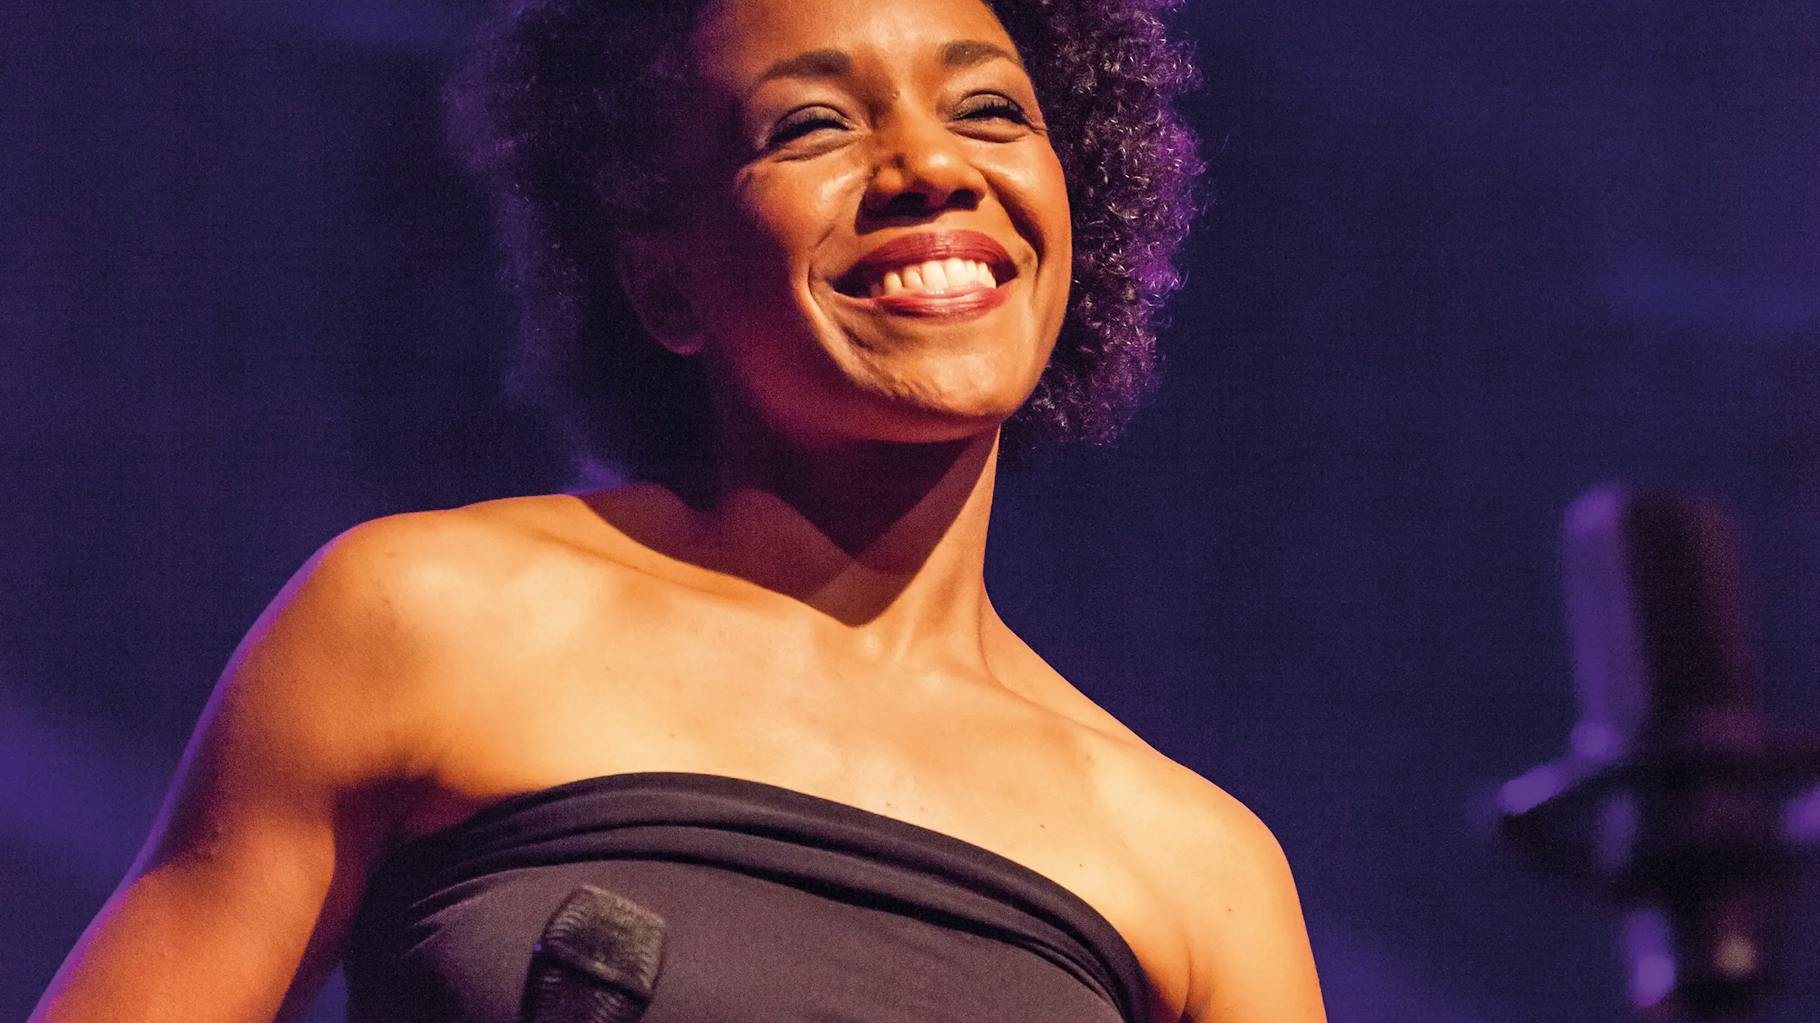 A backing singer, illuminated by the stage lights, smiles at the crowd.